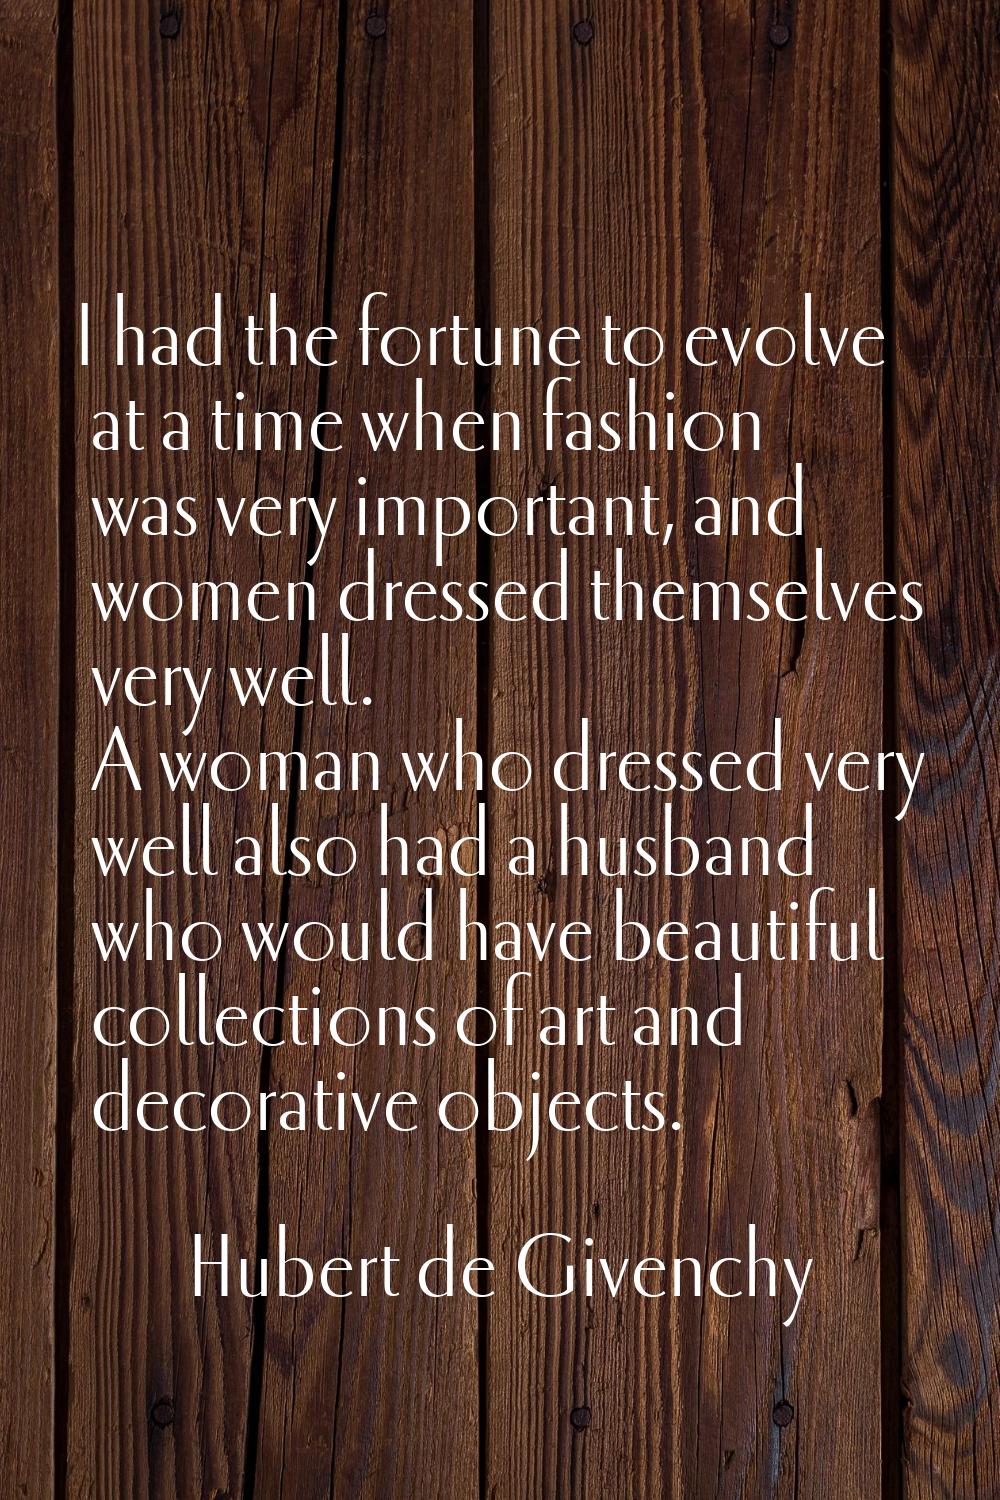 I had the fortune to evolve at a time when fashion was very important, and women dressed themselves